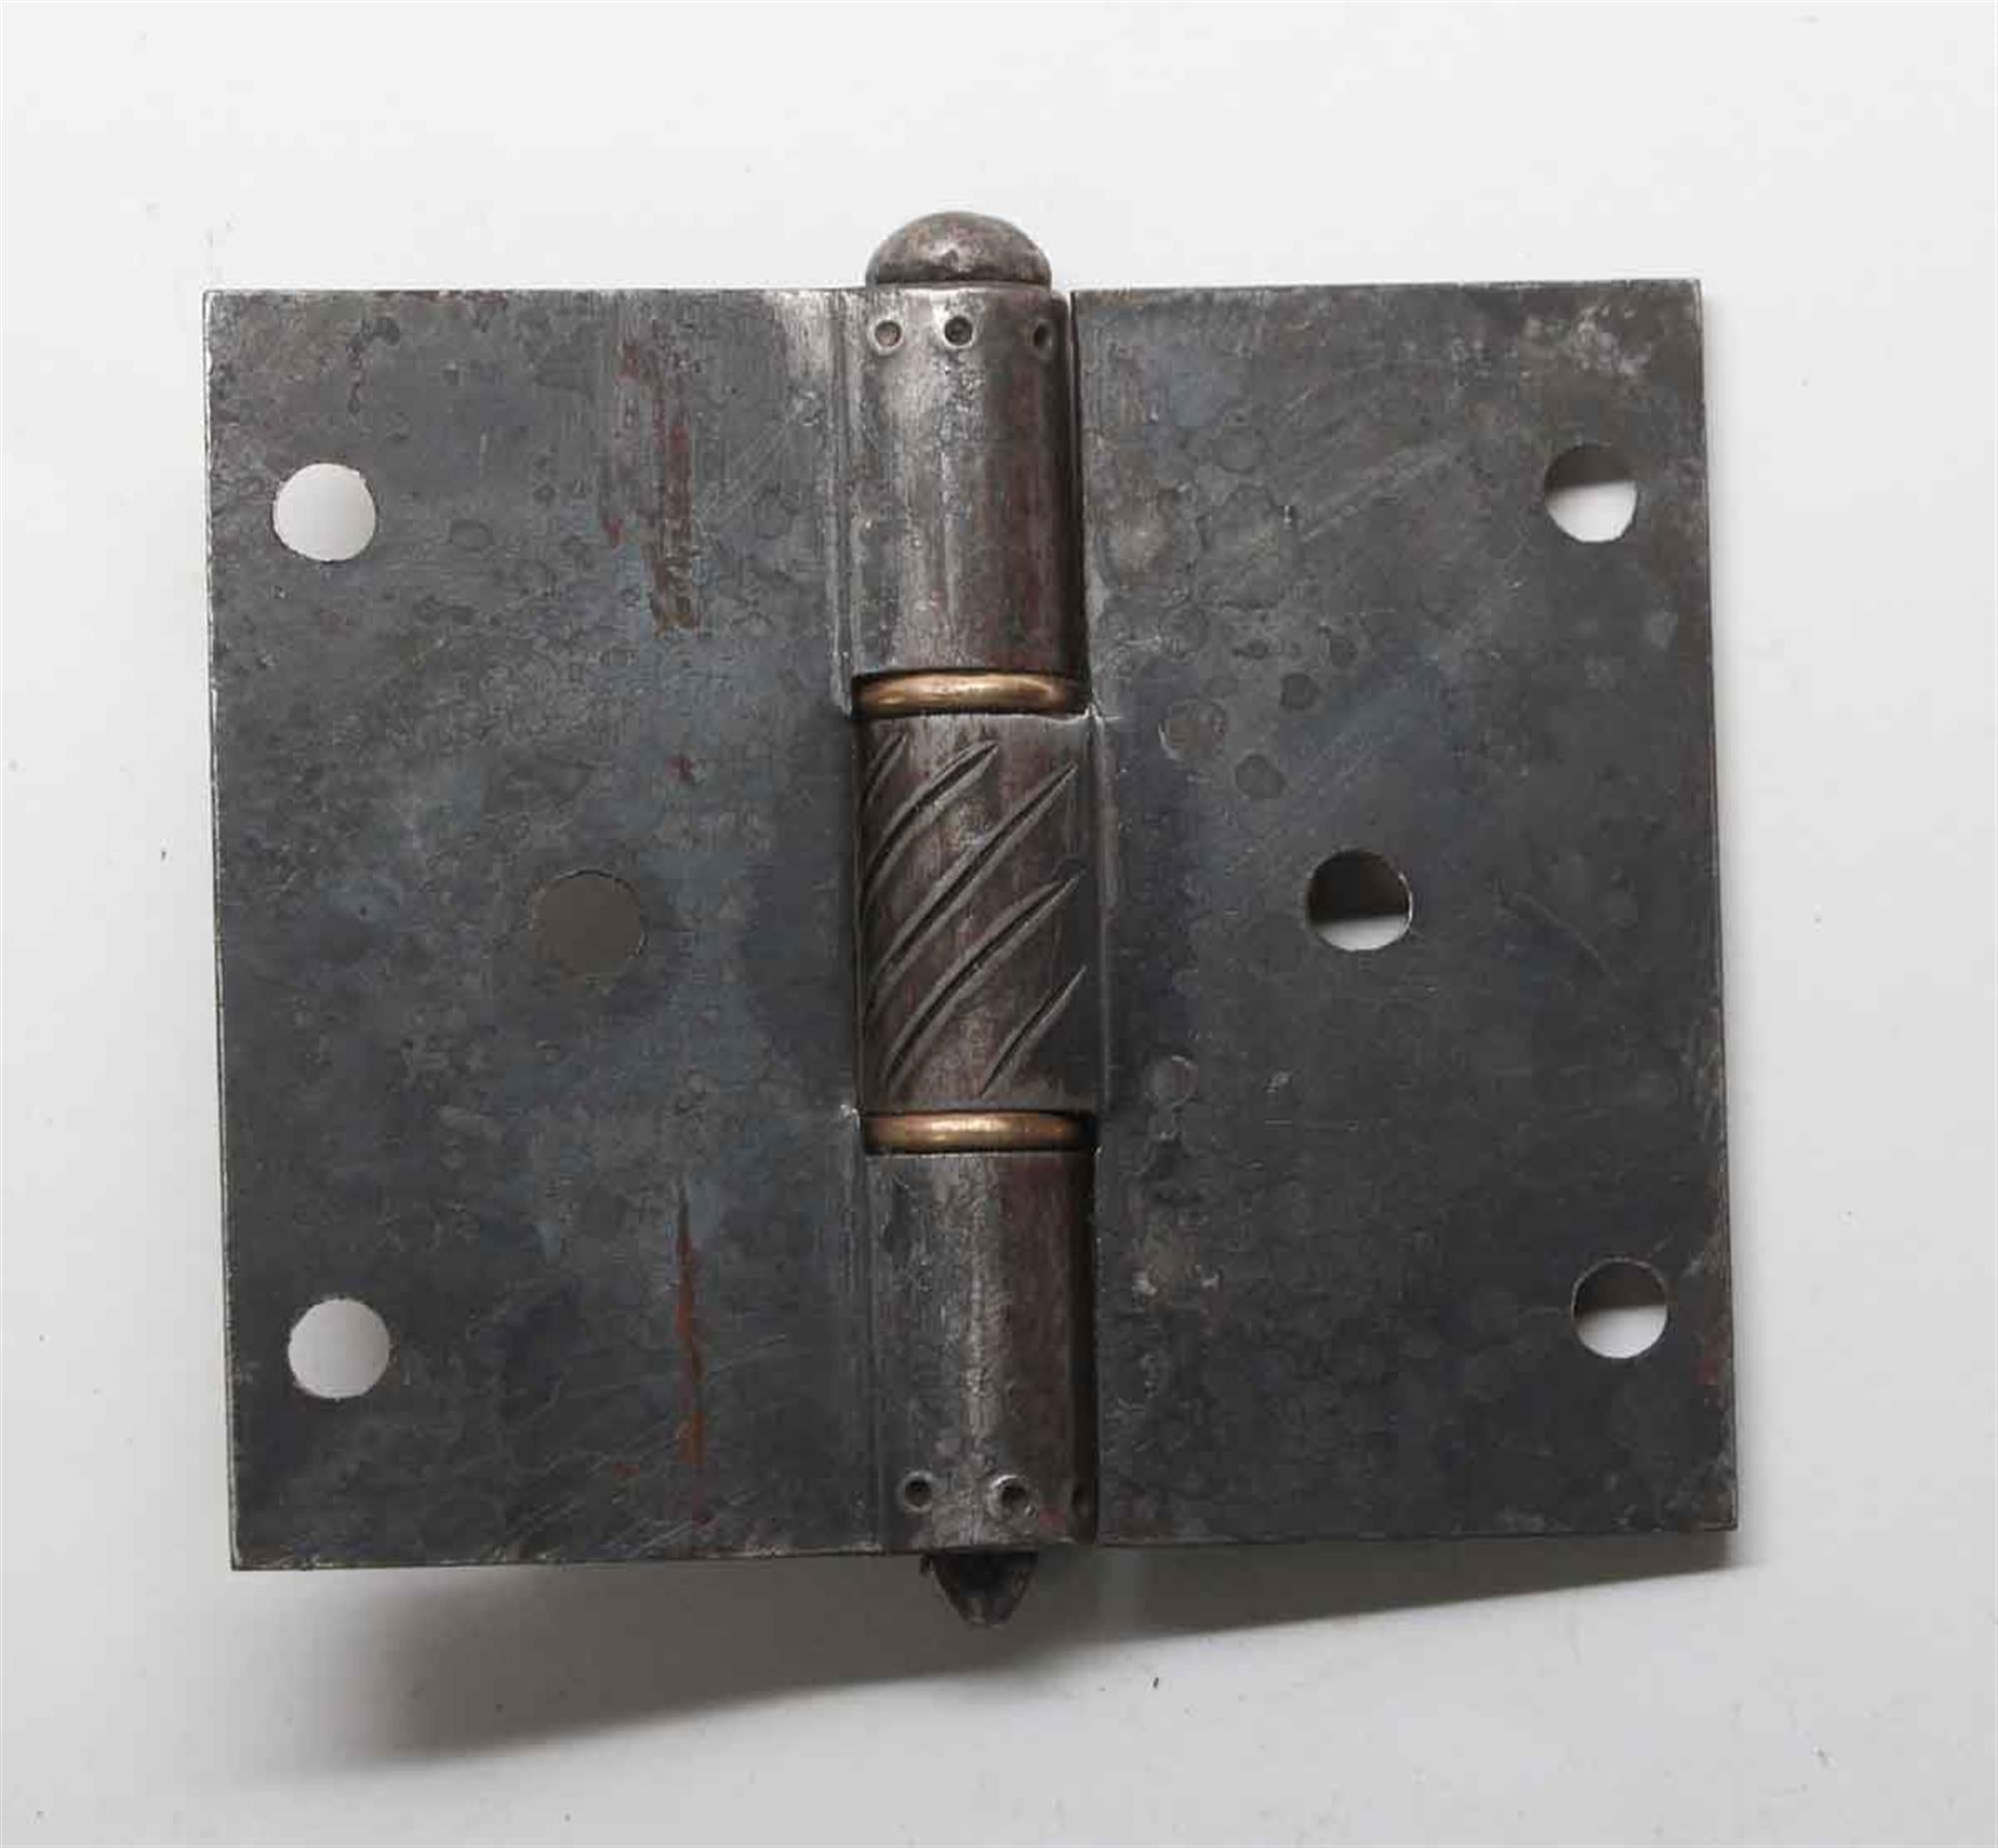 These are original ornamental hand forged iron door hinges attributed to Samuel Yellin. Each hinge is decorated with lines on the edges and brass washers. These Arts & Crafts hinges were salvaged from the La Tourelle Home in Fox Chapel, PA. The